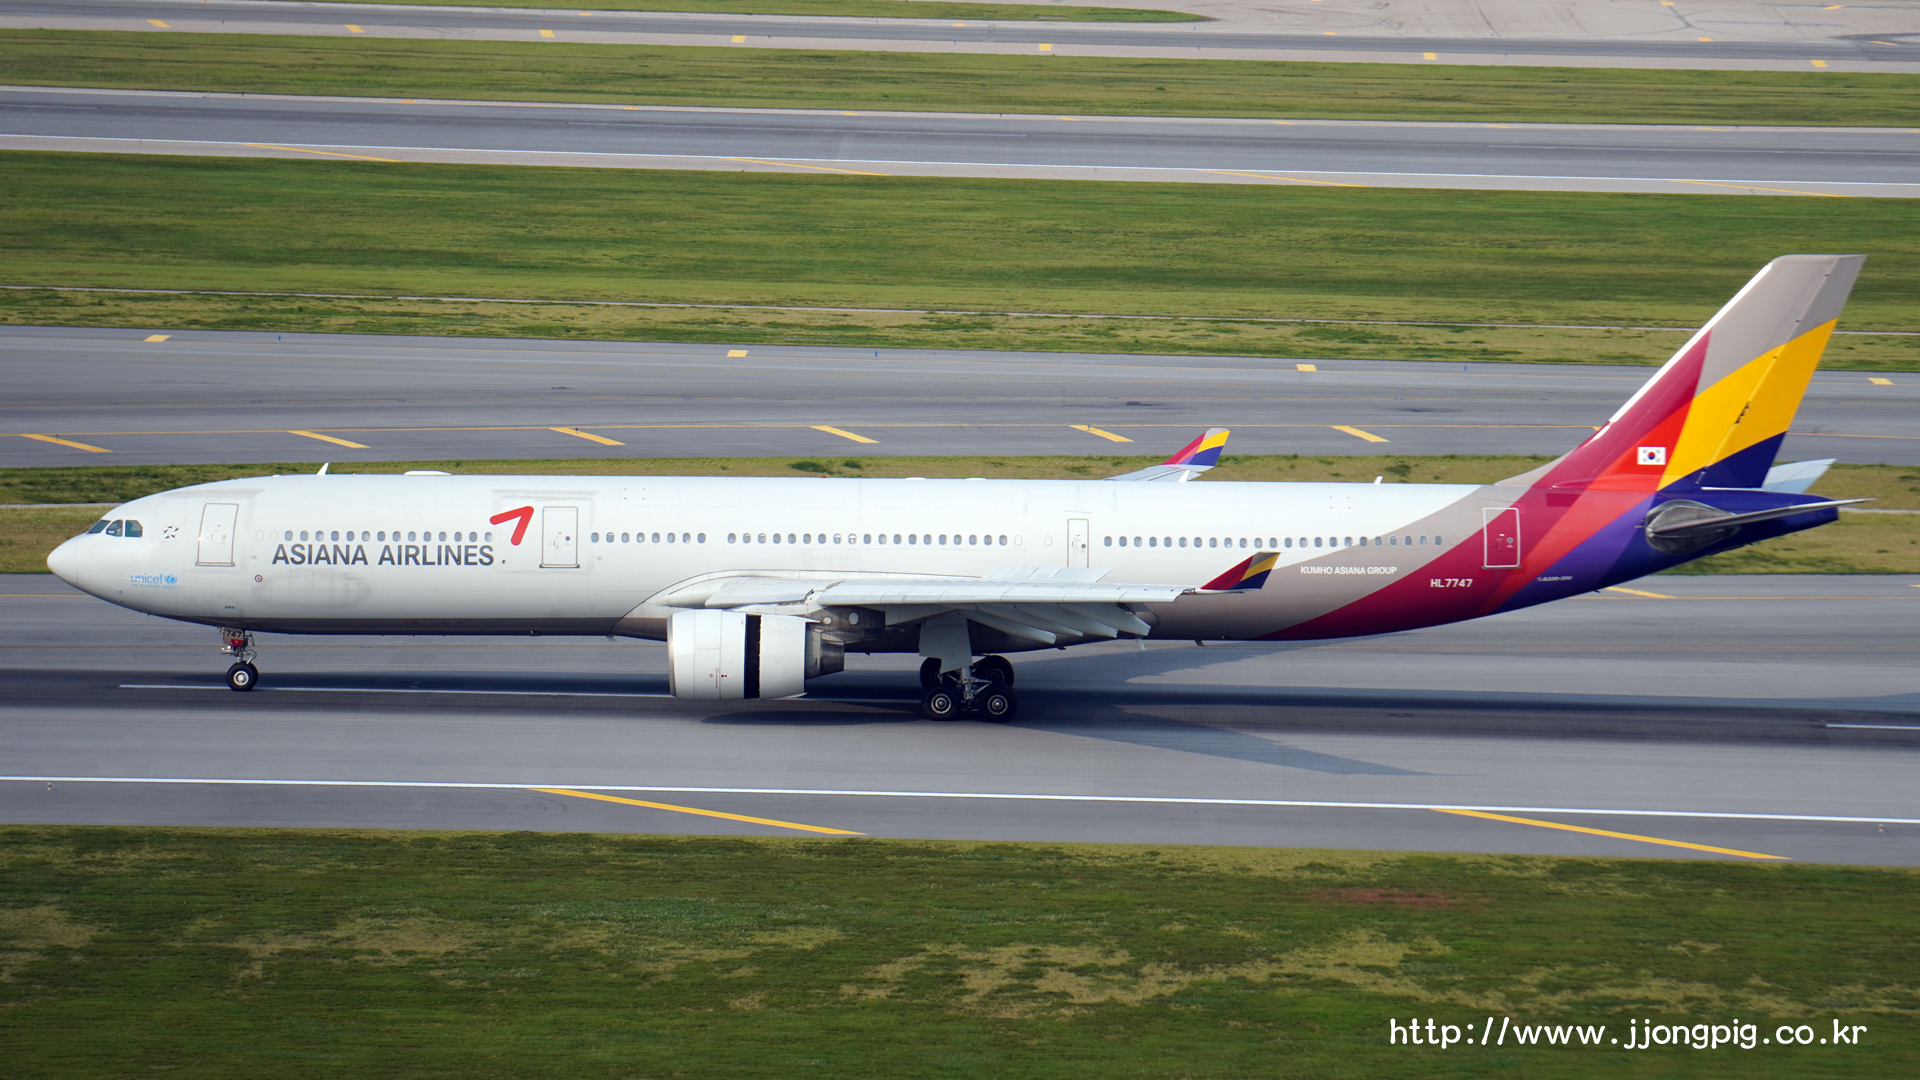 alt=Asiana Airlines HL7747 Airbus A330-300